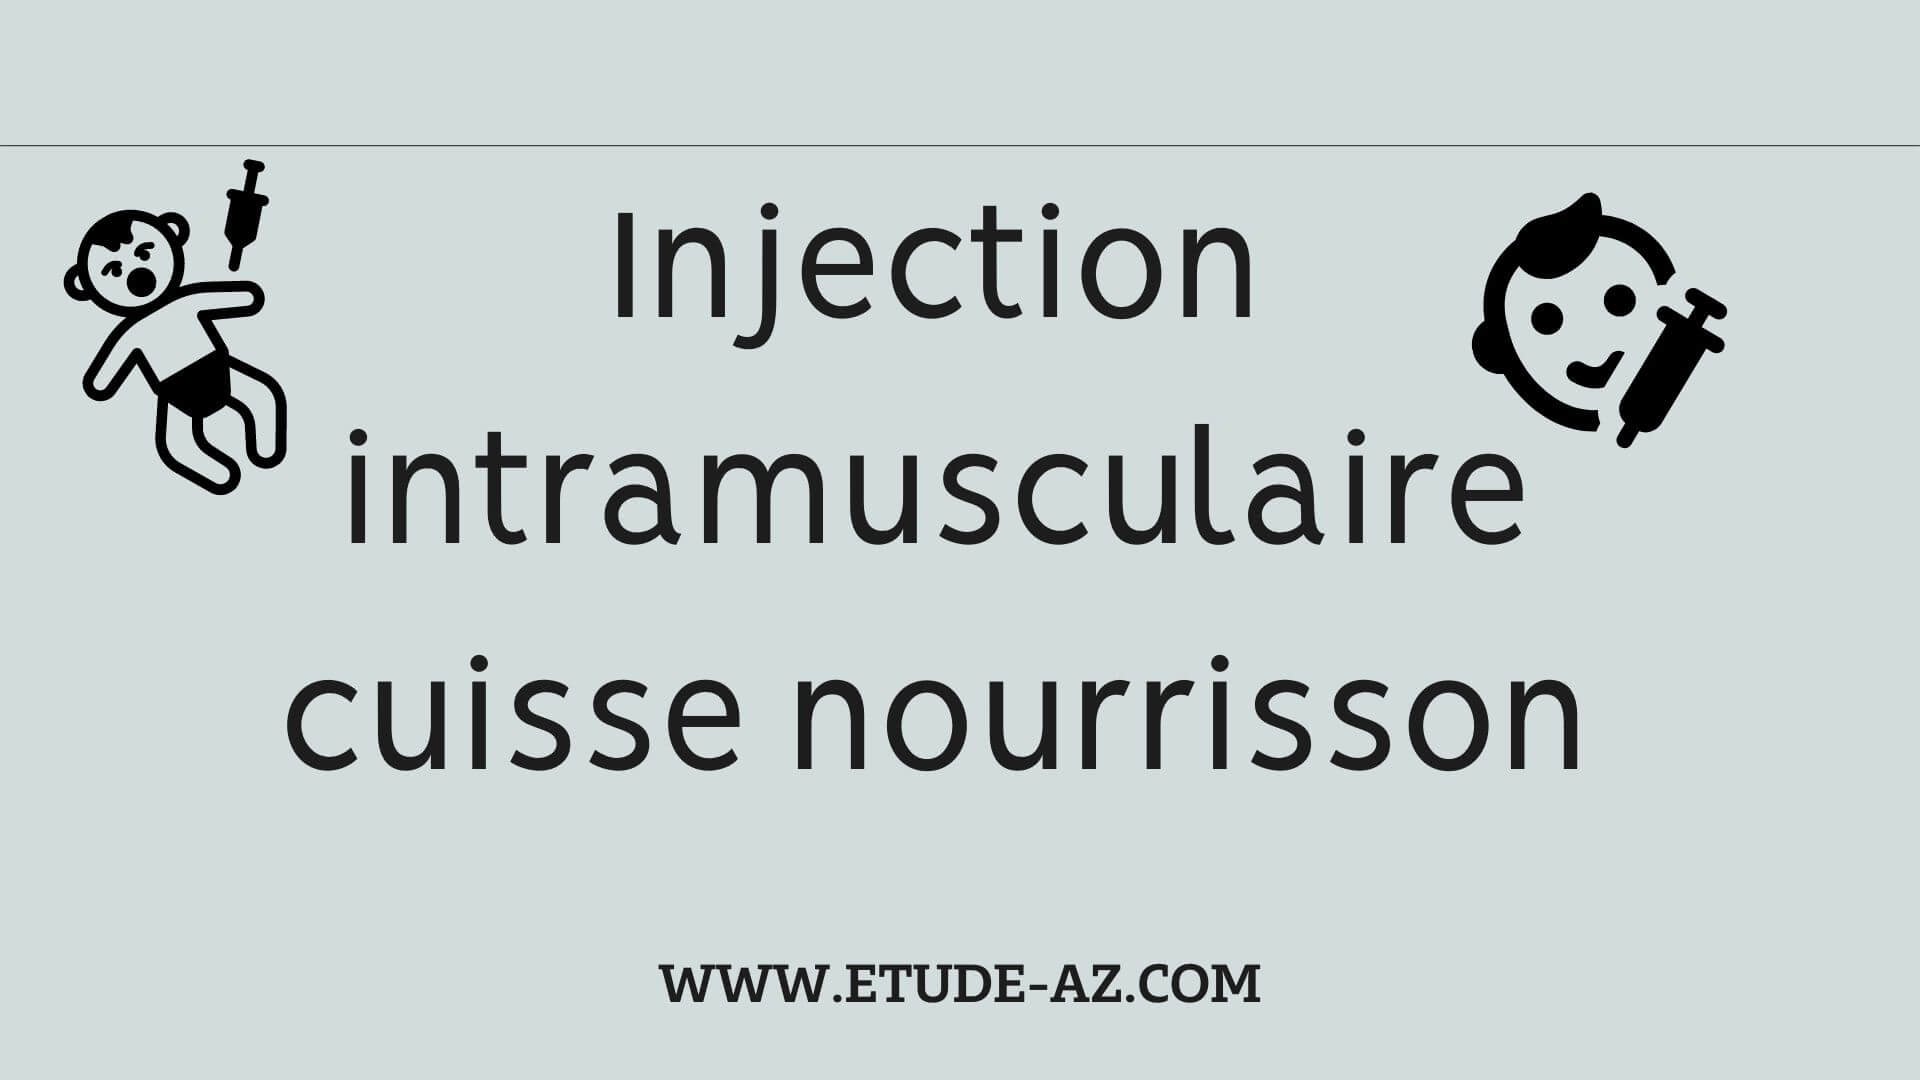 injection intramusculaire cuisse nourrisson